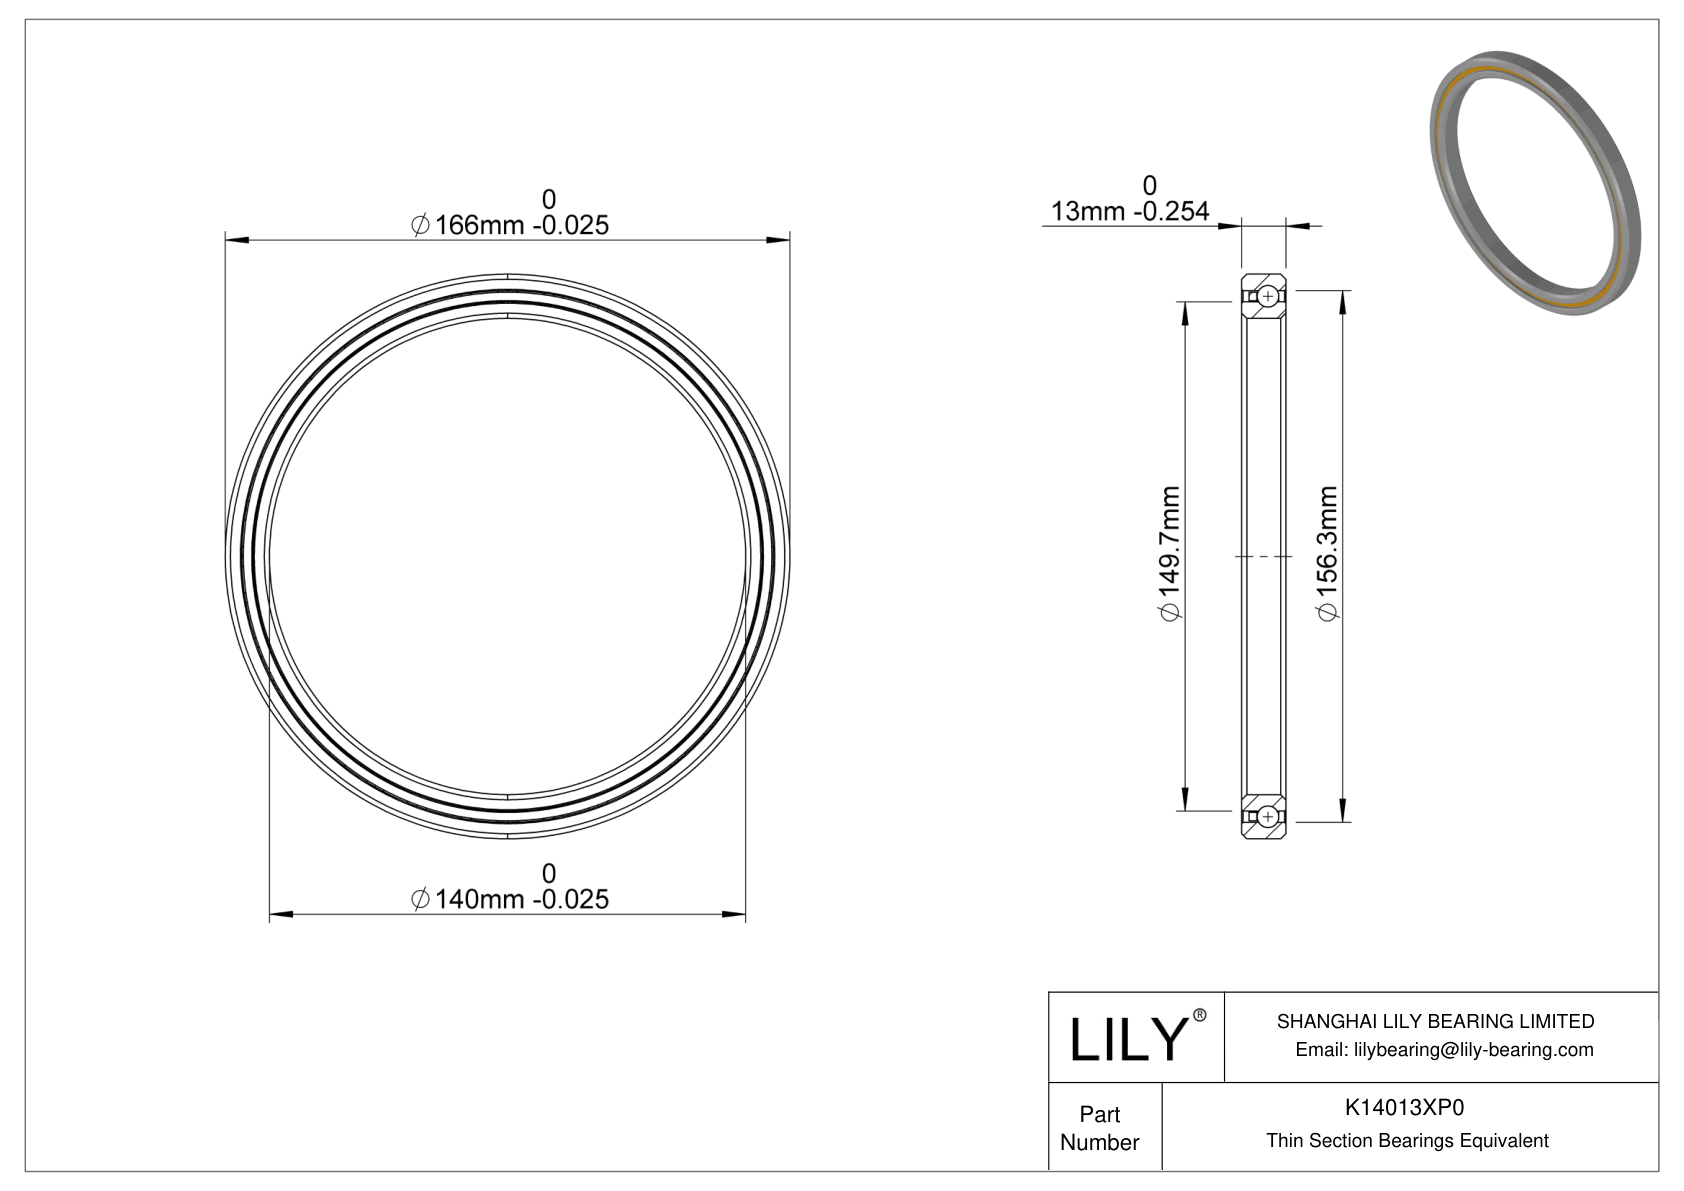 K14013XP0 Constant Section (CS) Bearings cad drawing